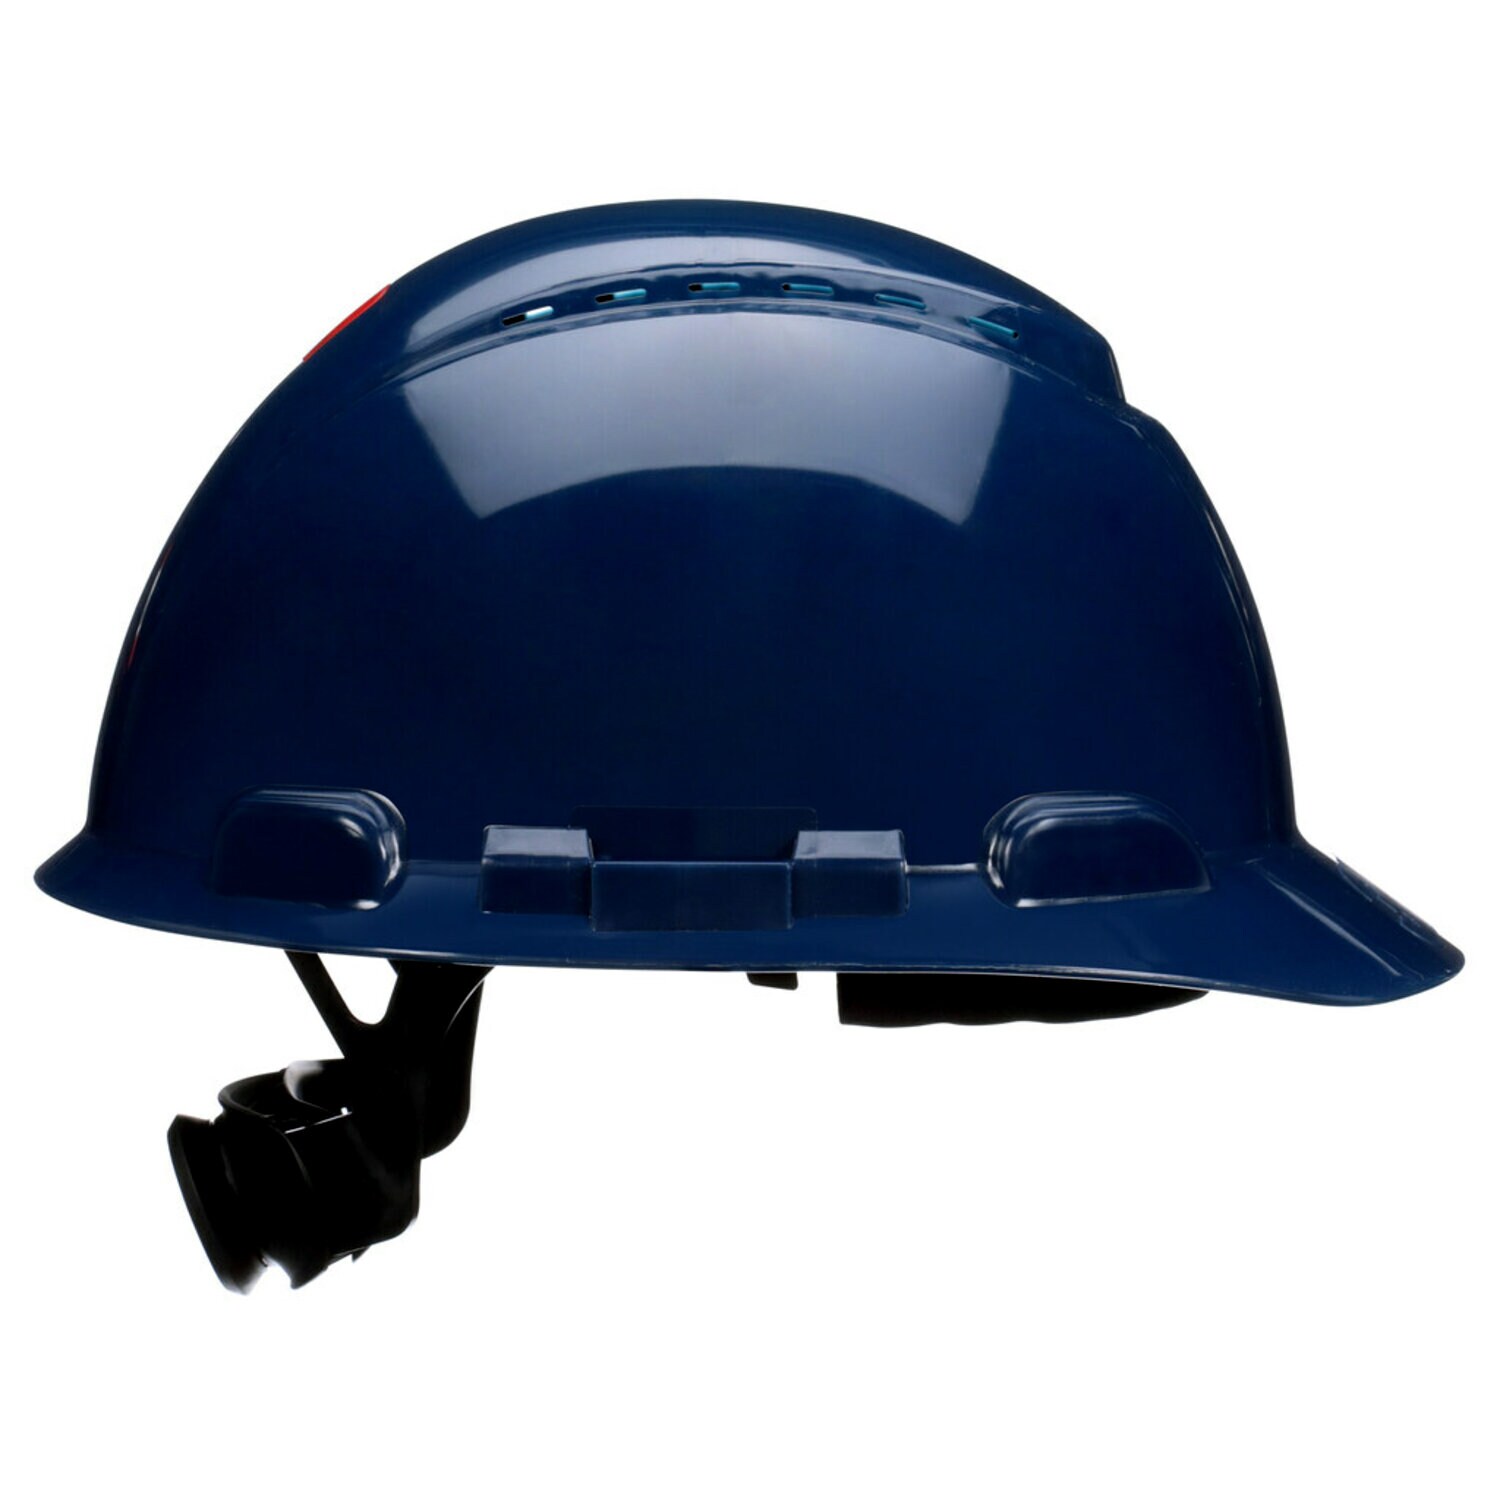 7100239996 - 3M SecureFit Hard Hat H-710SFV-UV, Navy Blue, 4-Point Pressure Diffusion Ratchet Suspension, with UVicator, 20 ea/Case